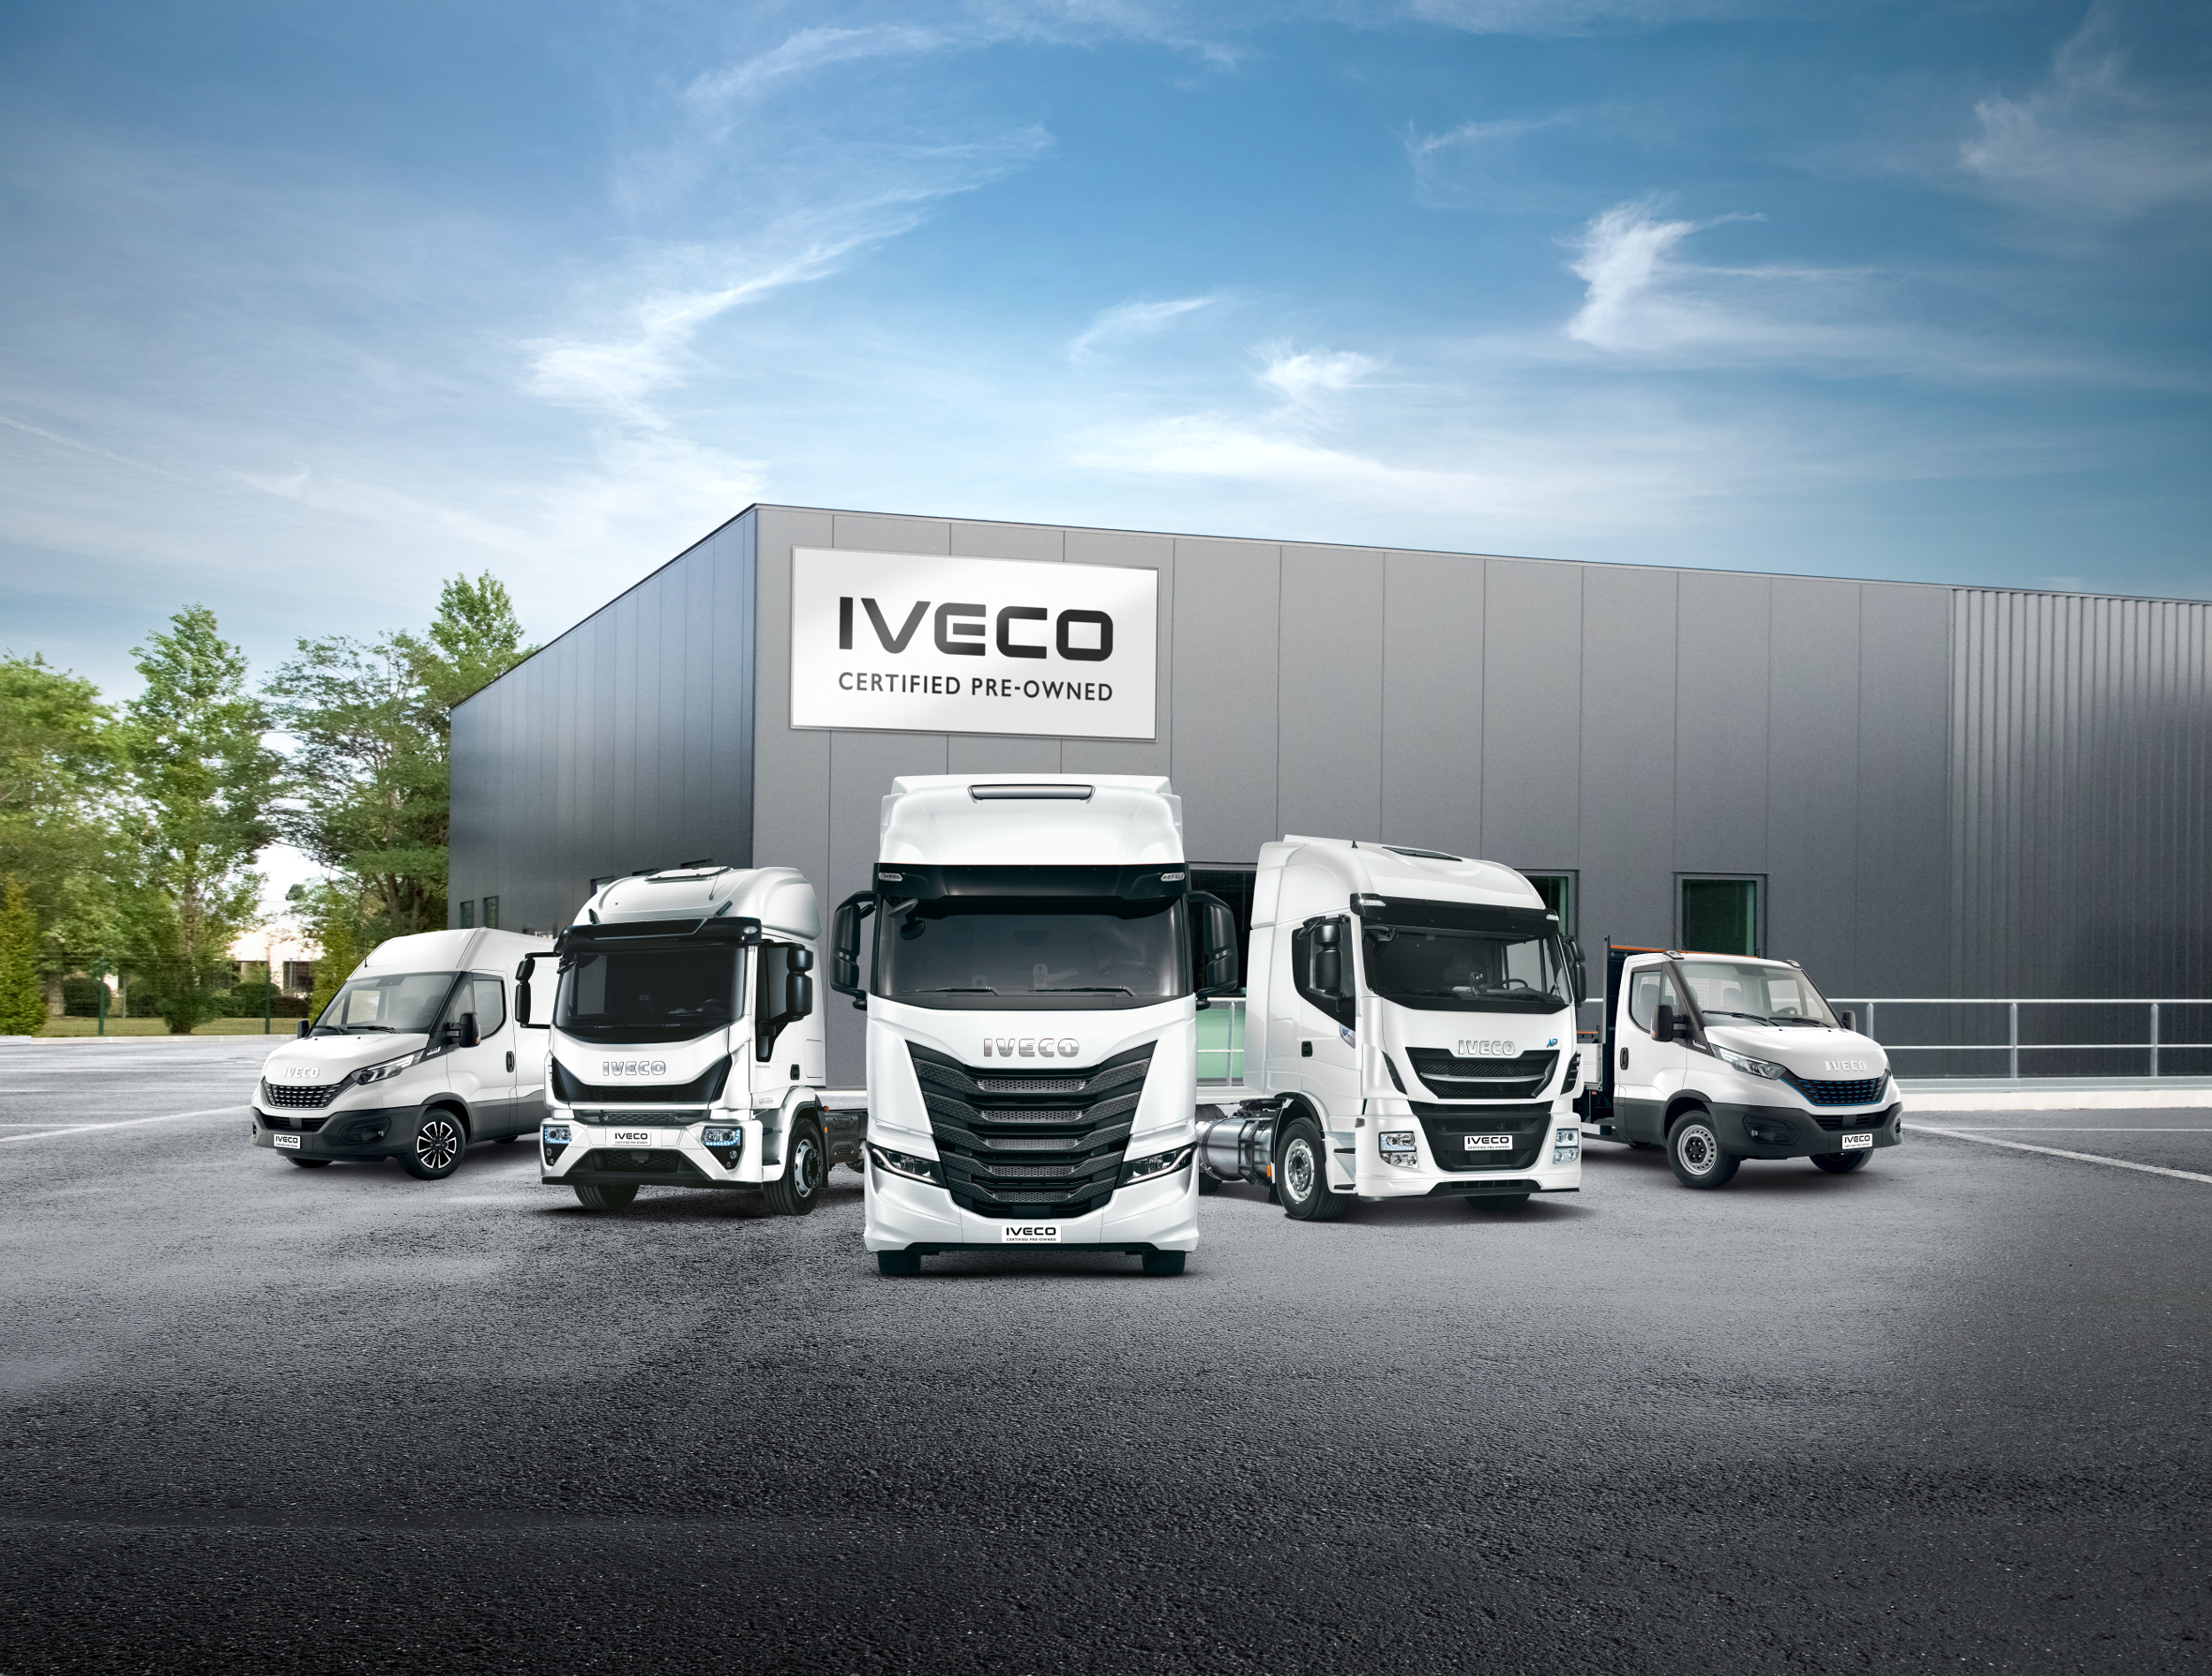 IVECO Range Certified Pre Owned